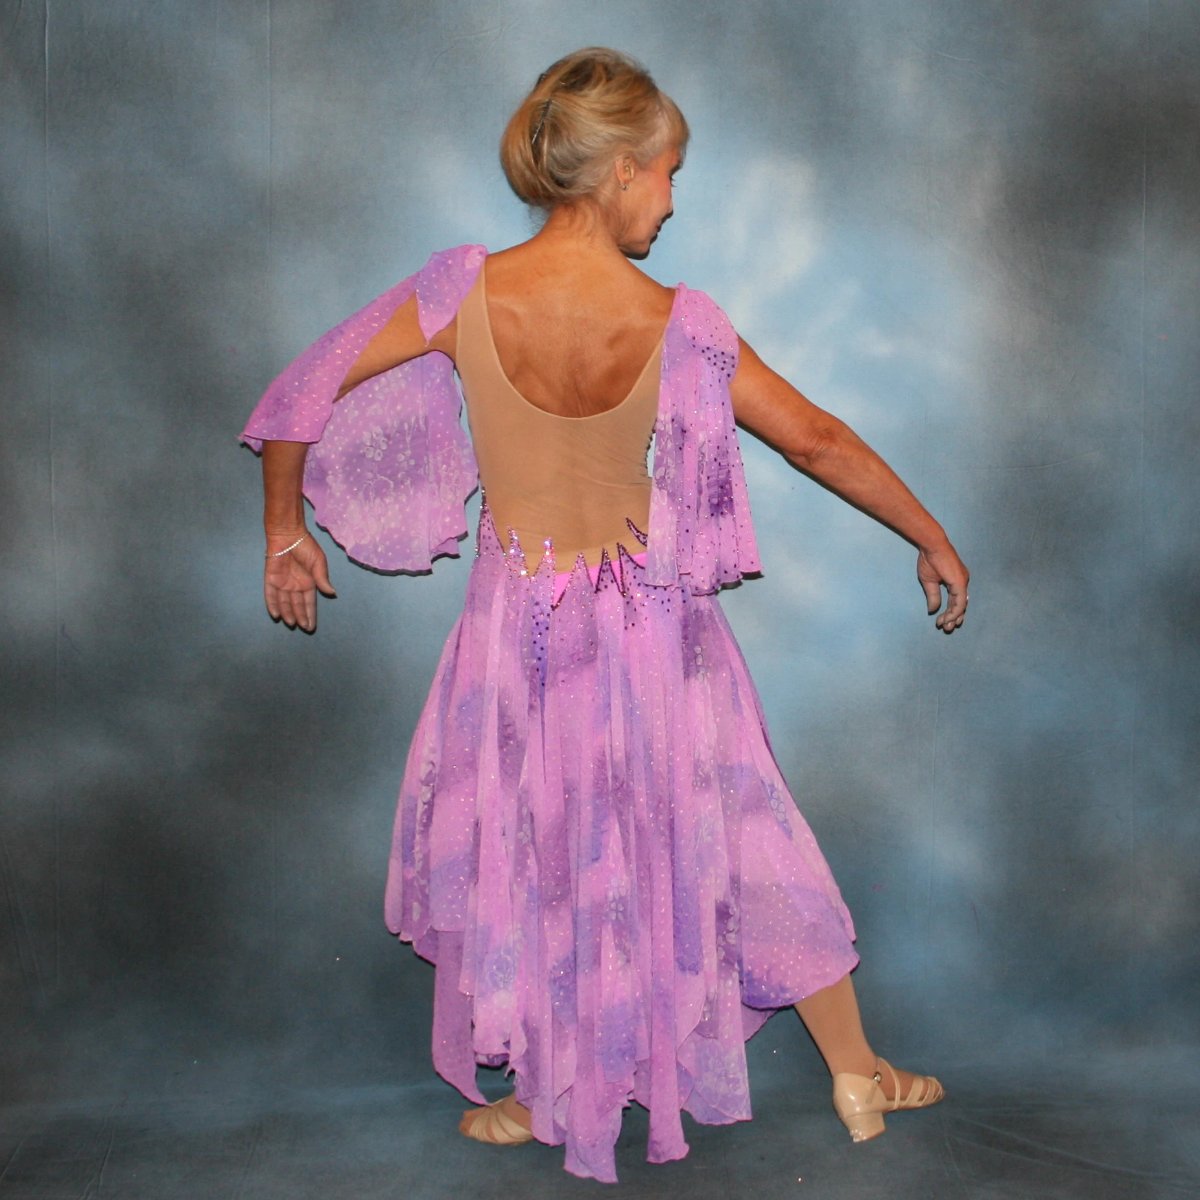 Crystal's Creations back view of Orchid ballroom dress created in yards of a textured chiffon in shades of orchids & purples on a nude illusion base with floats & Swarovski stonework in gorgeous shades of orchids & purples.